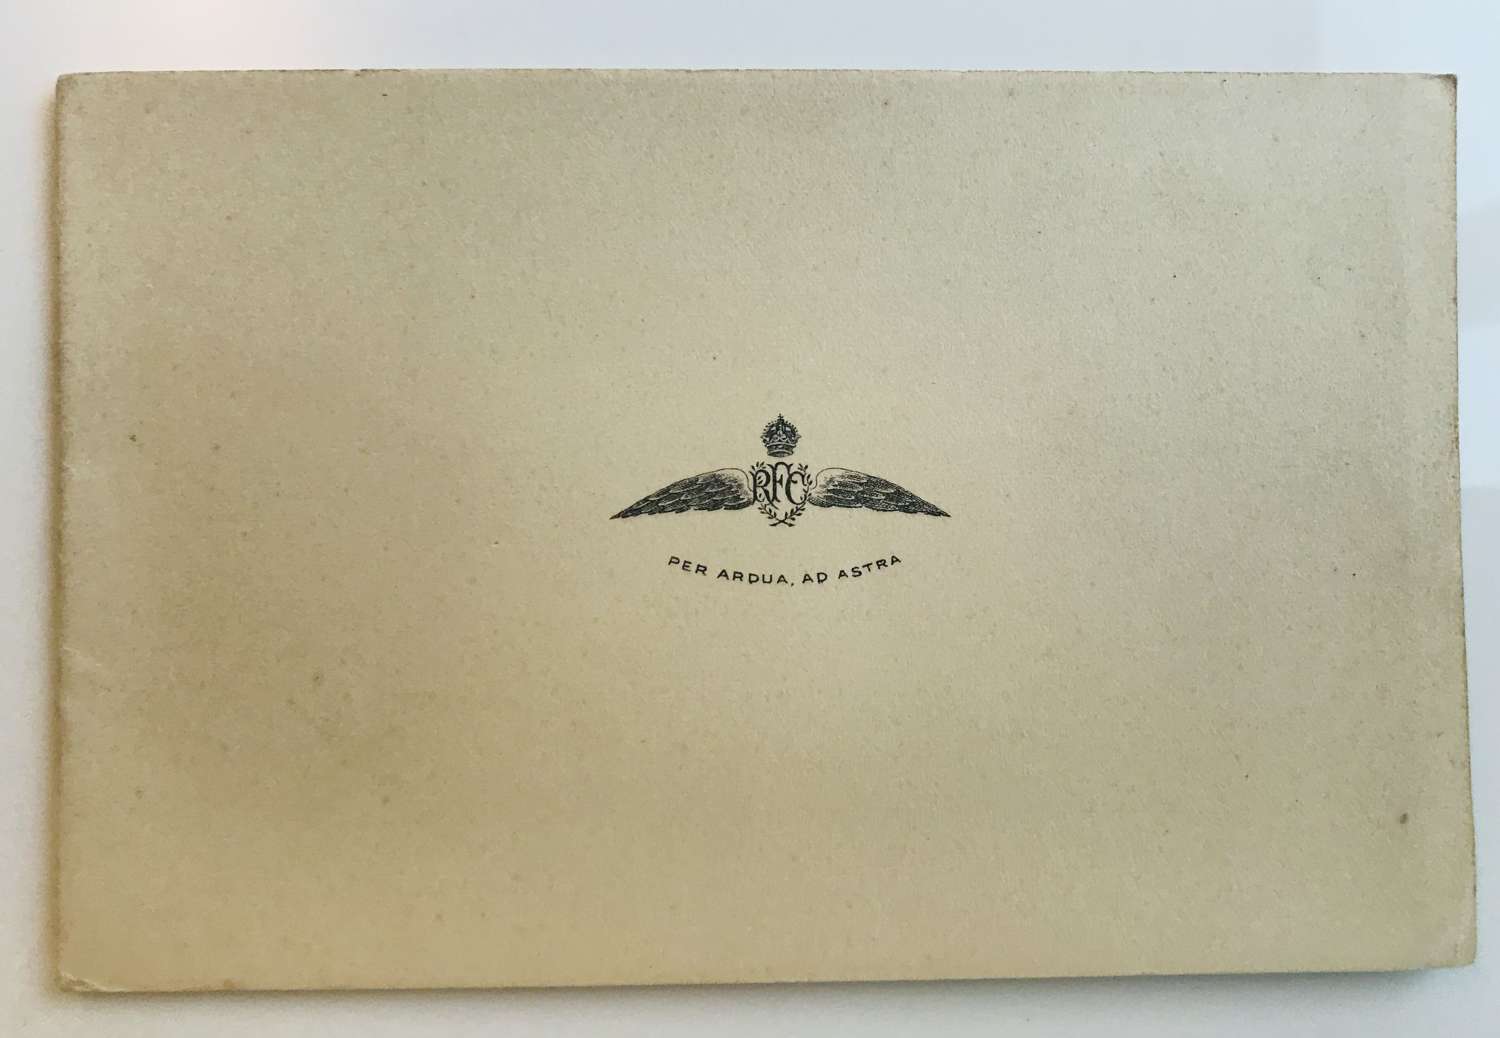 Royal flying corps Christmas card dated 1917